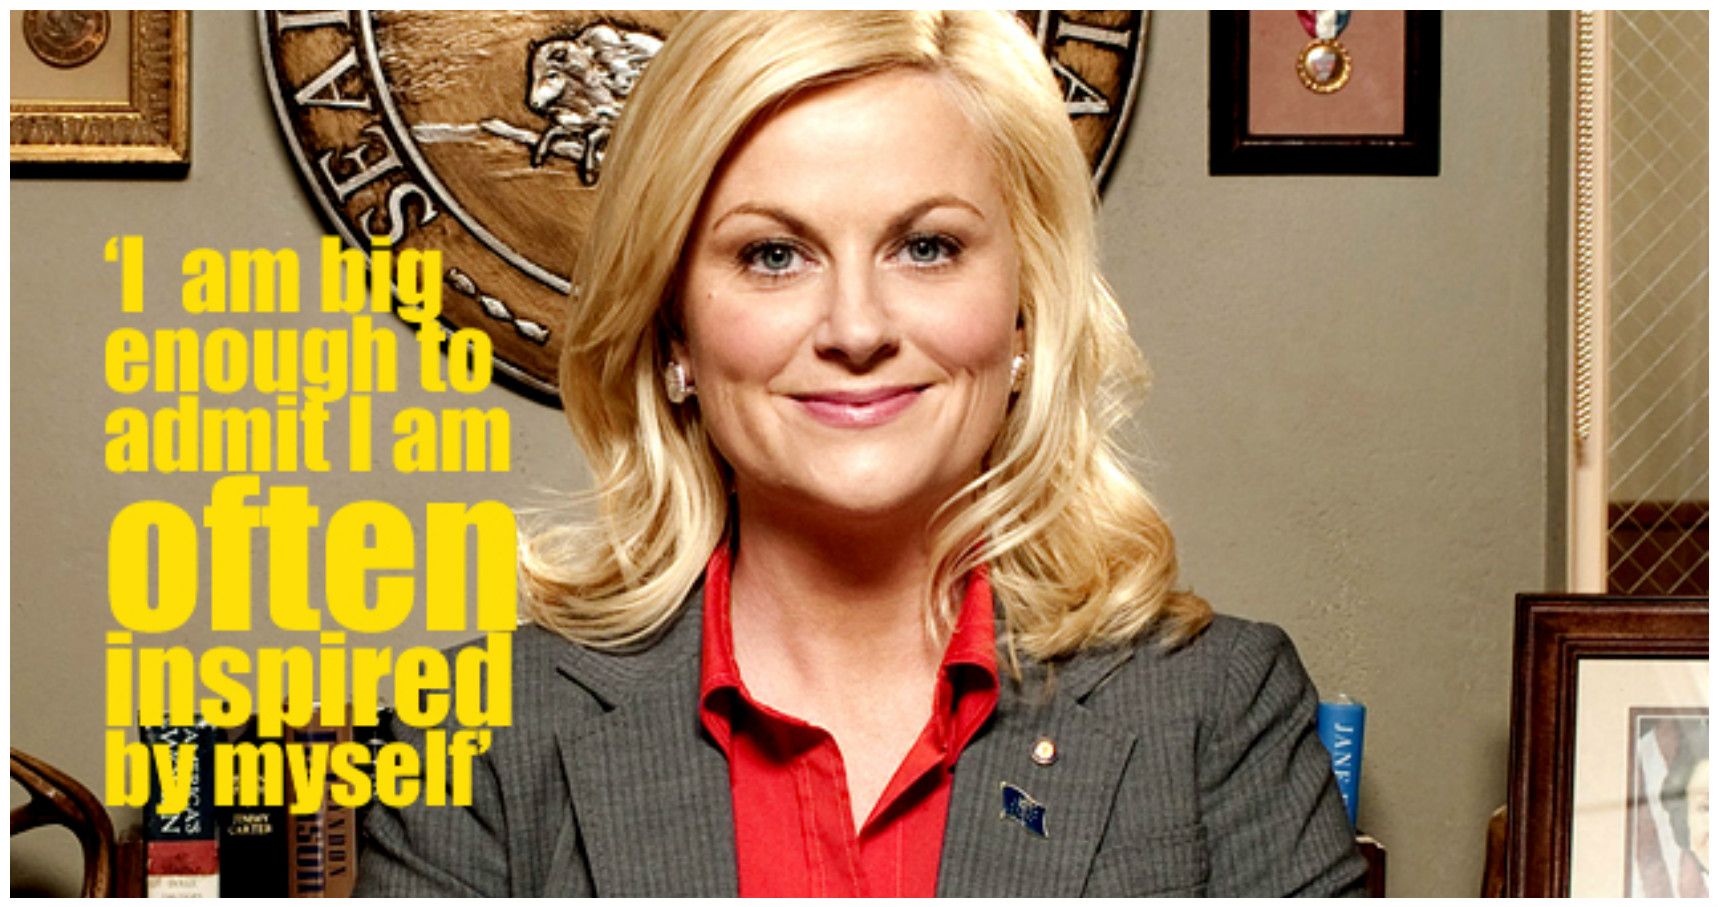 motivational quotes leslie knope